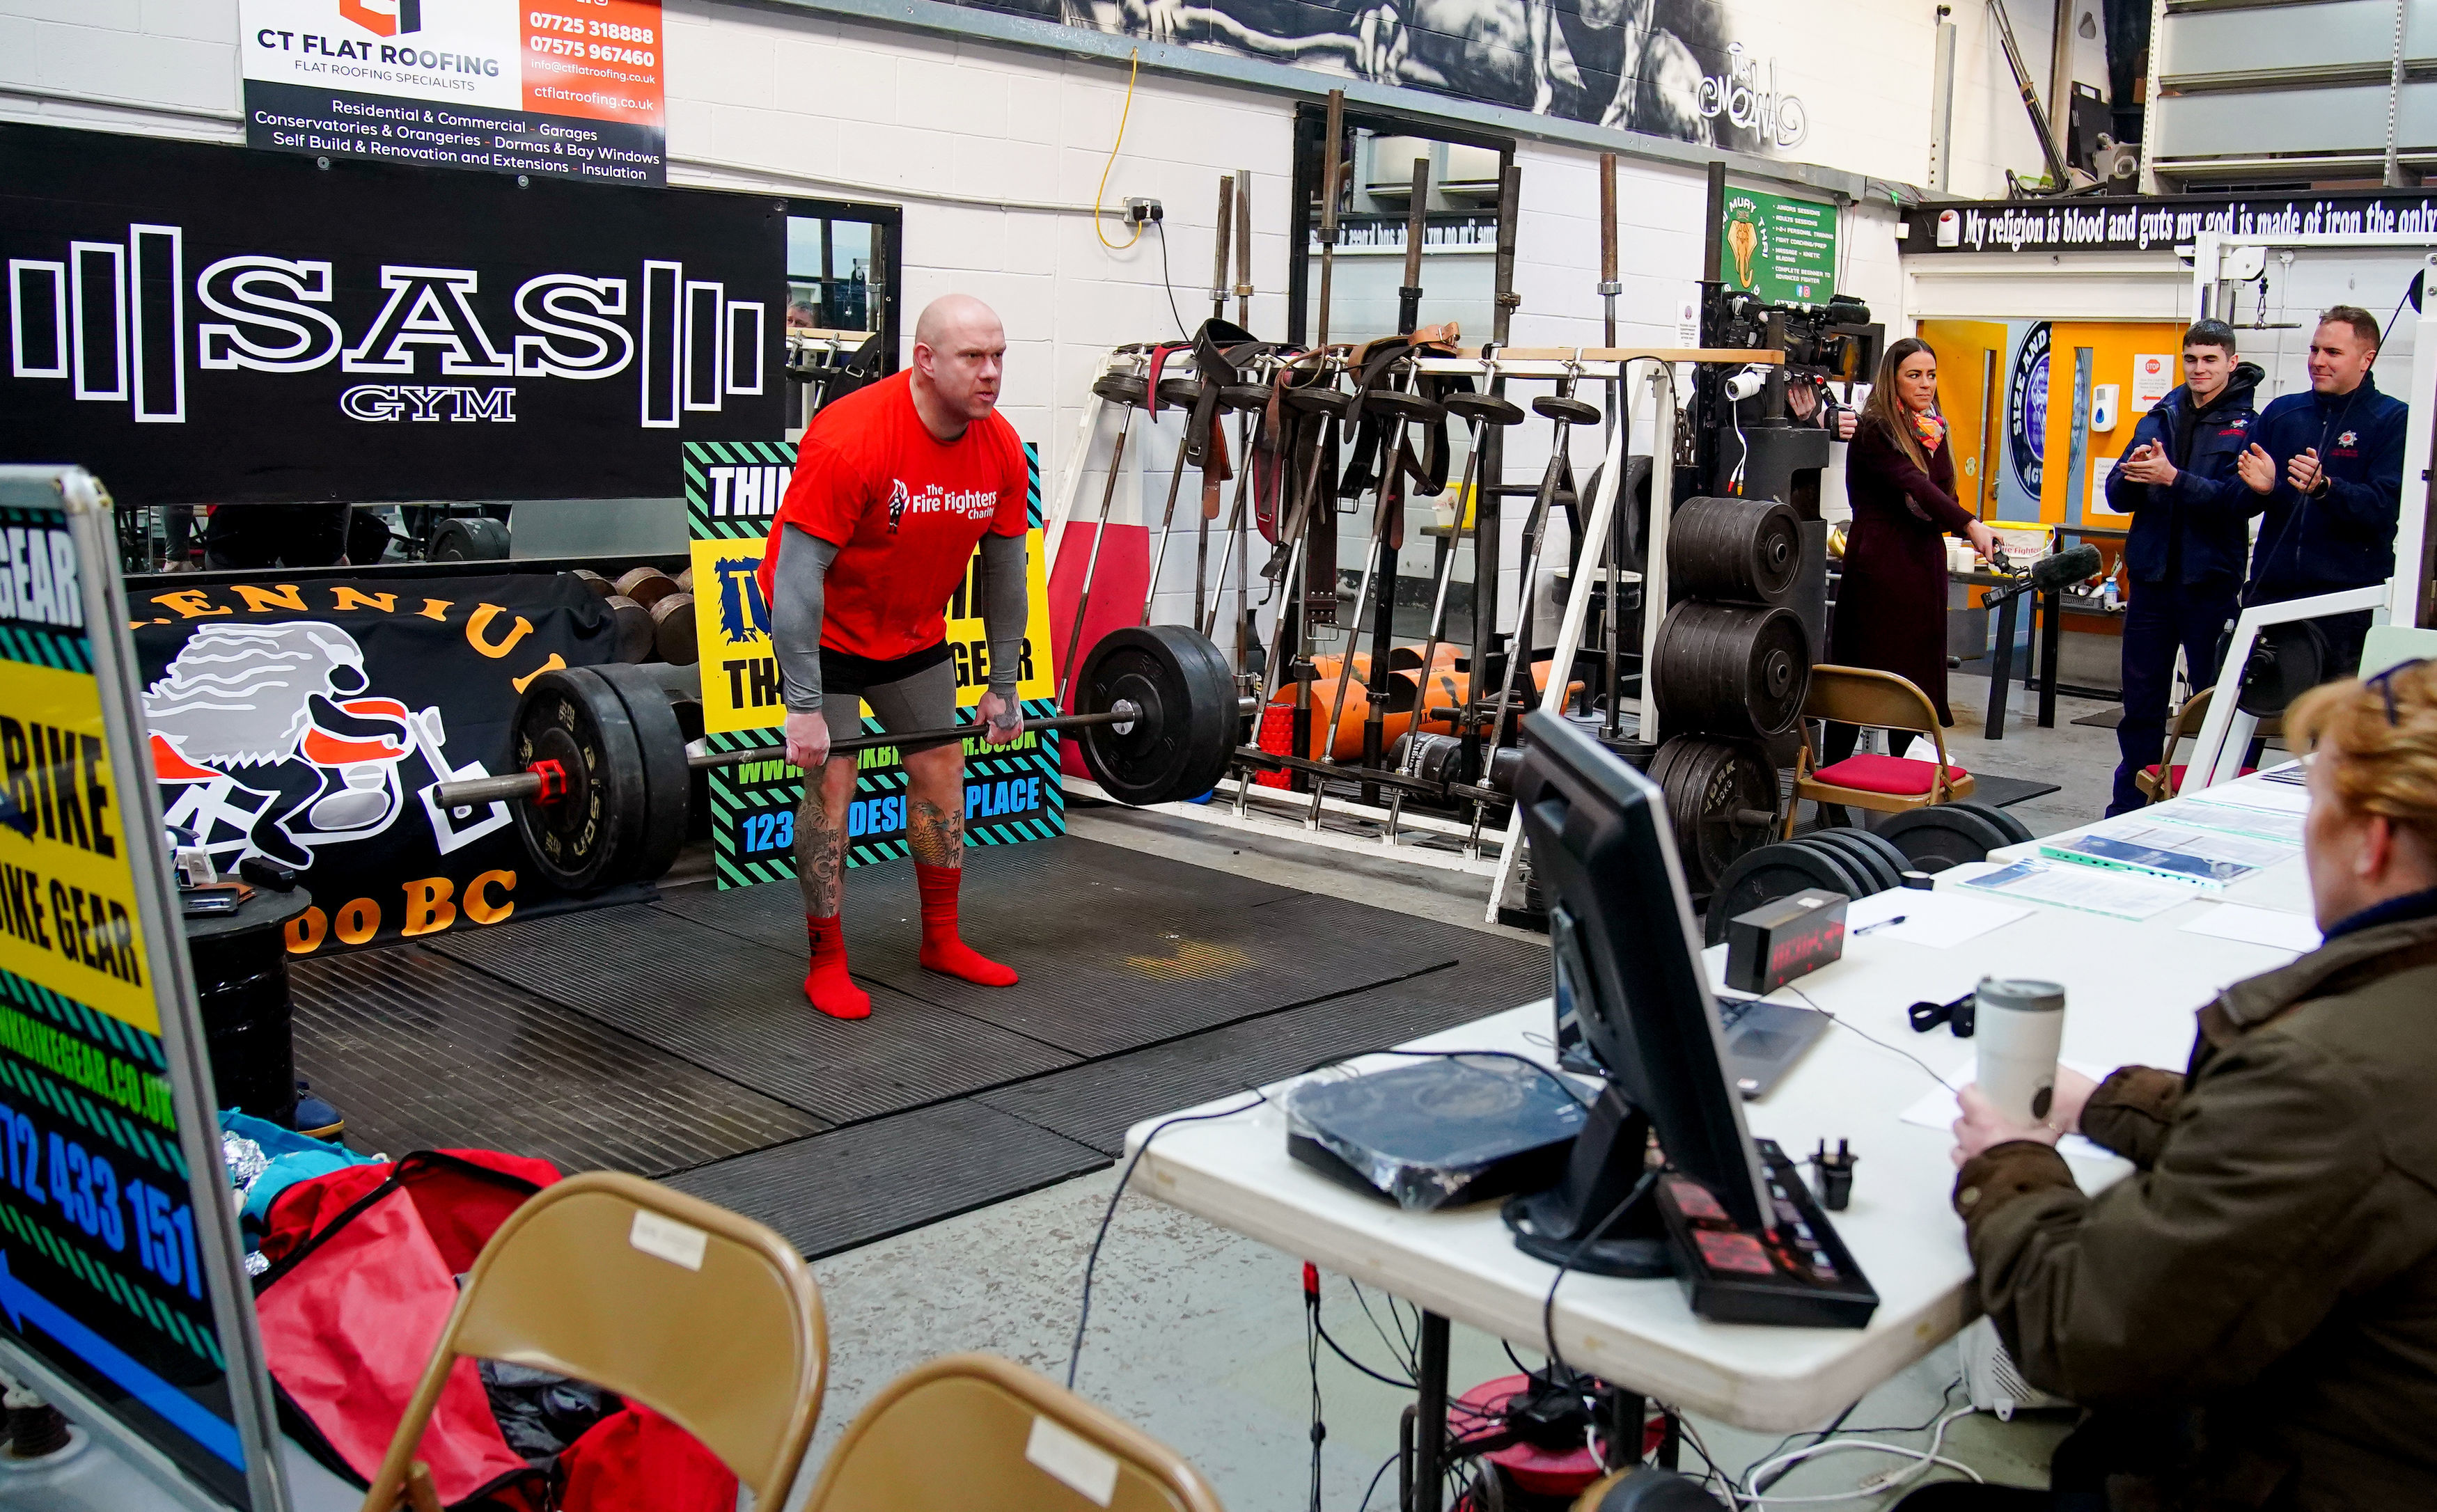 Firefighter Glen Bailey, 42, attempts to break the Guinness World Record for the most weight lifted in 24 hours at the SAS gym in Leyland, Lancashire, to raise money for the The Fire Fighters Charity. (Peter Byrne/PA)